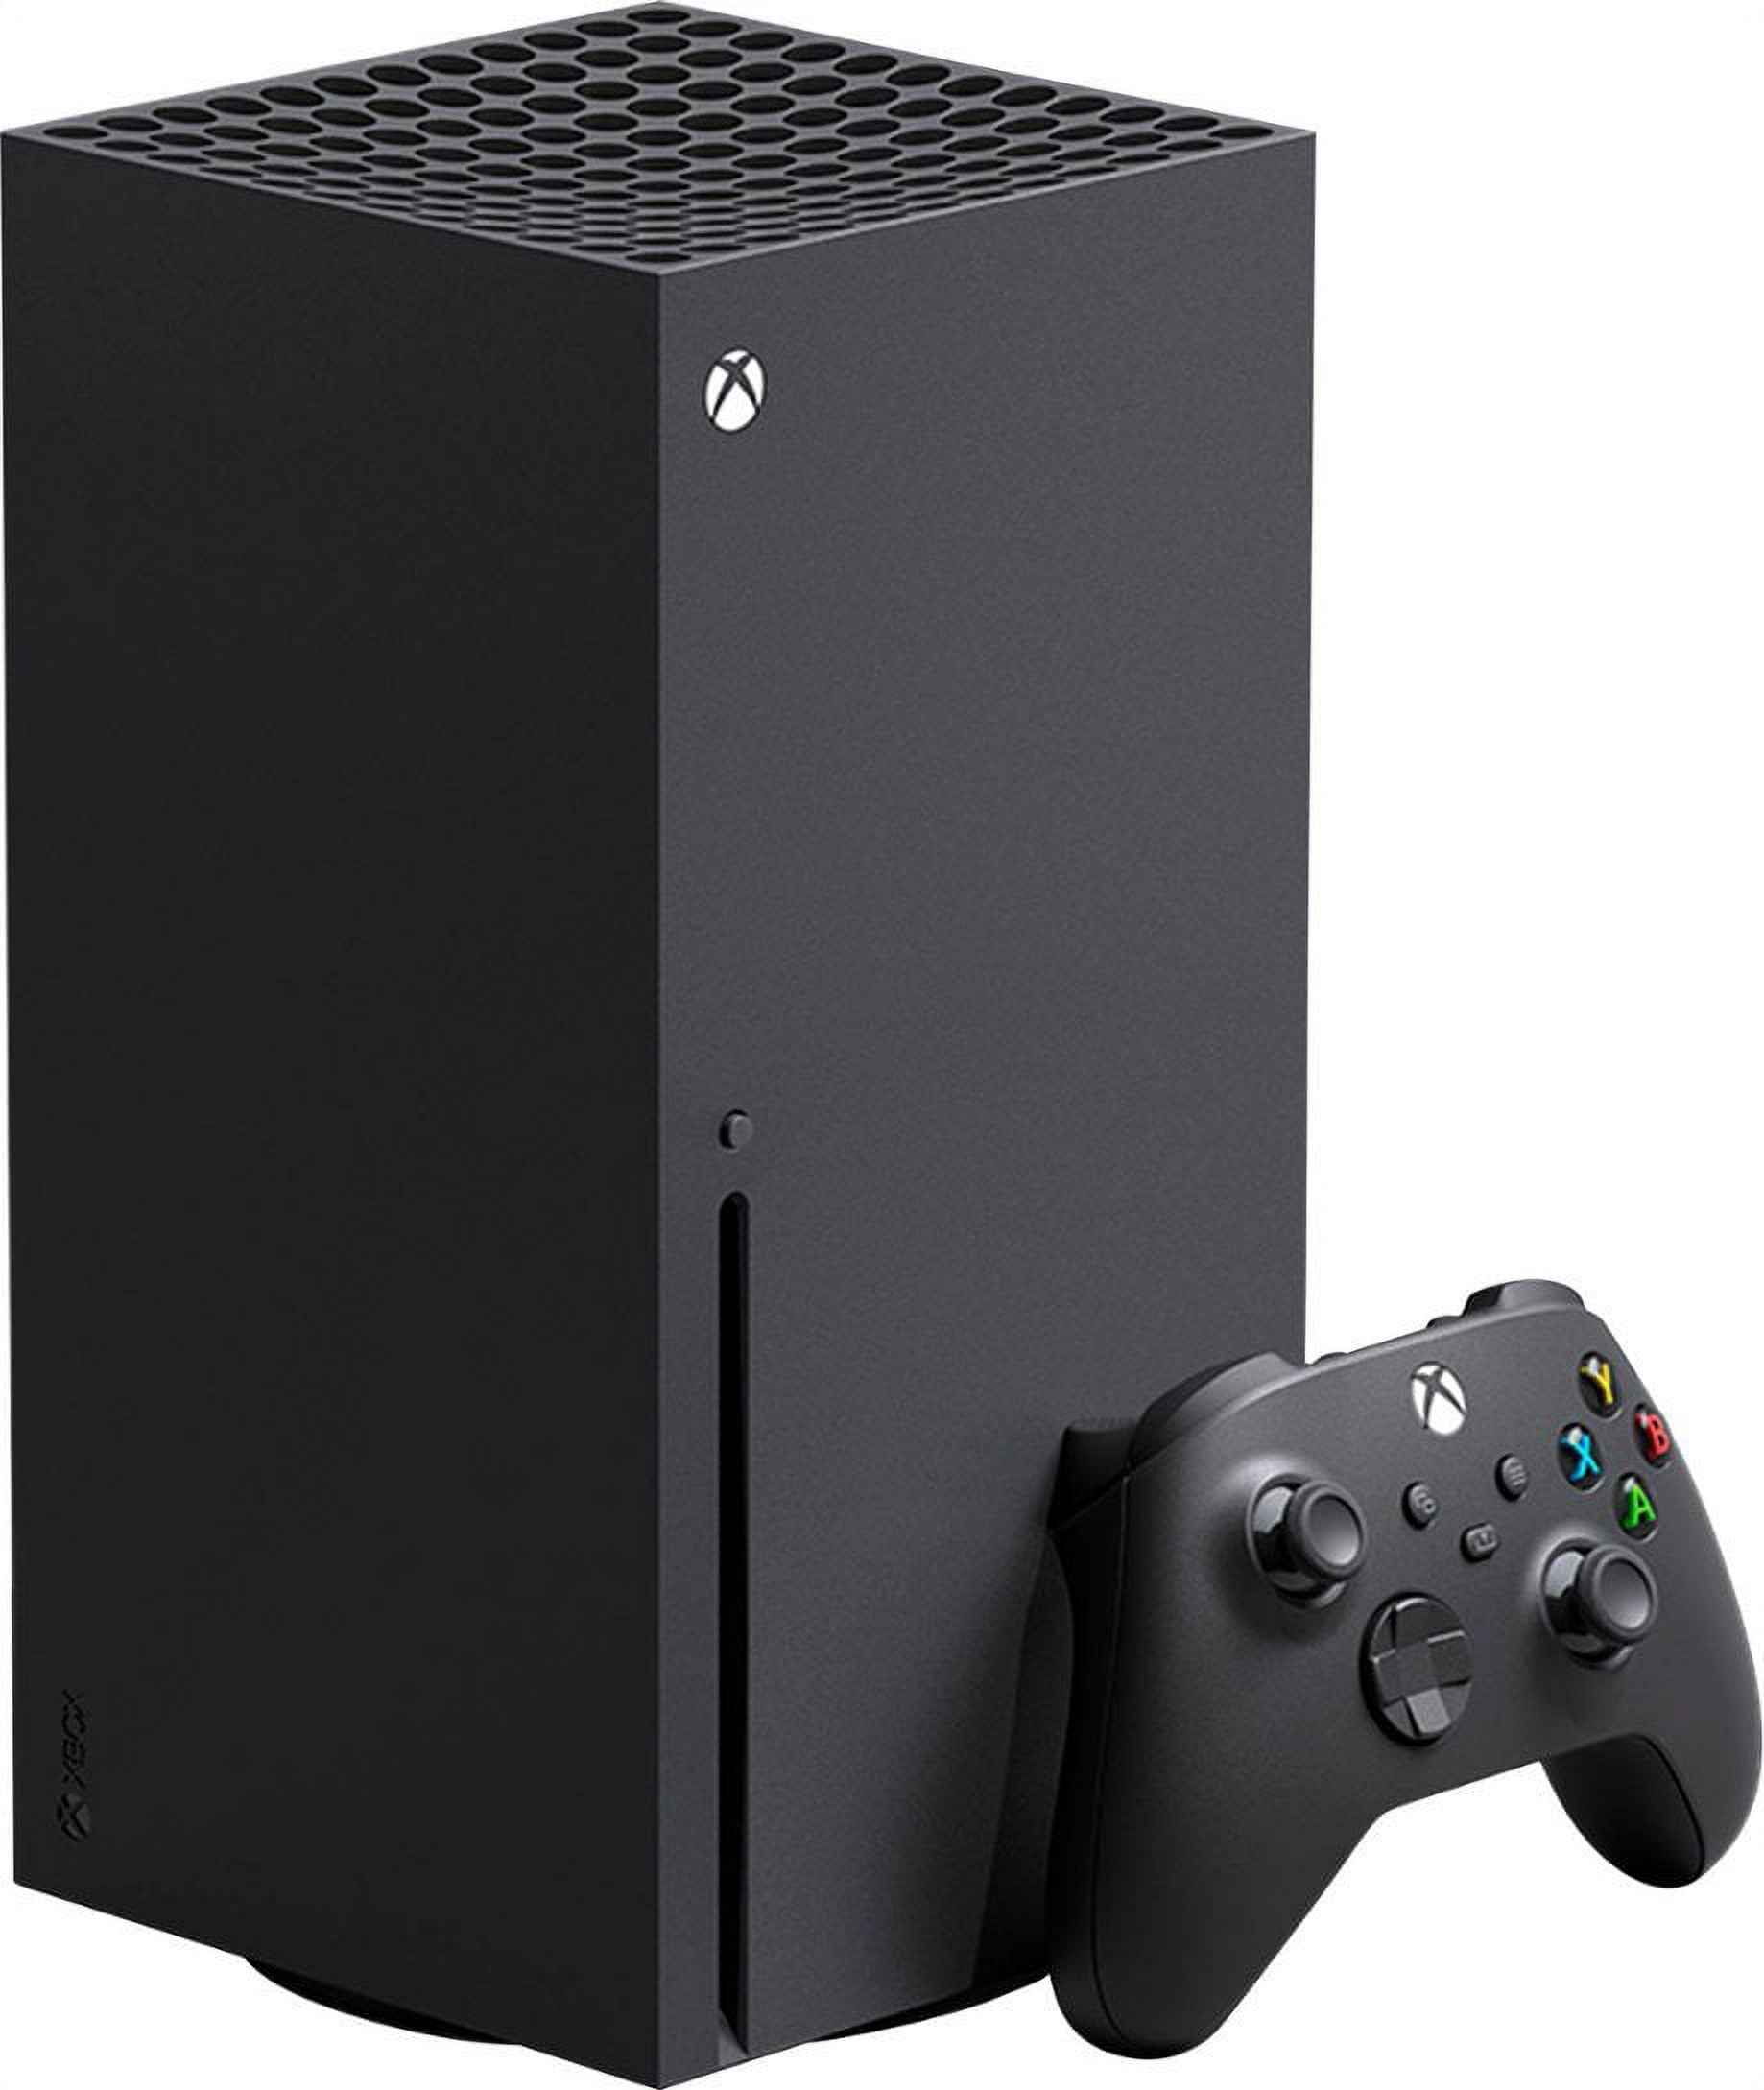 Microsoft Xbox Series X video game console and controller [3